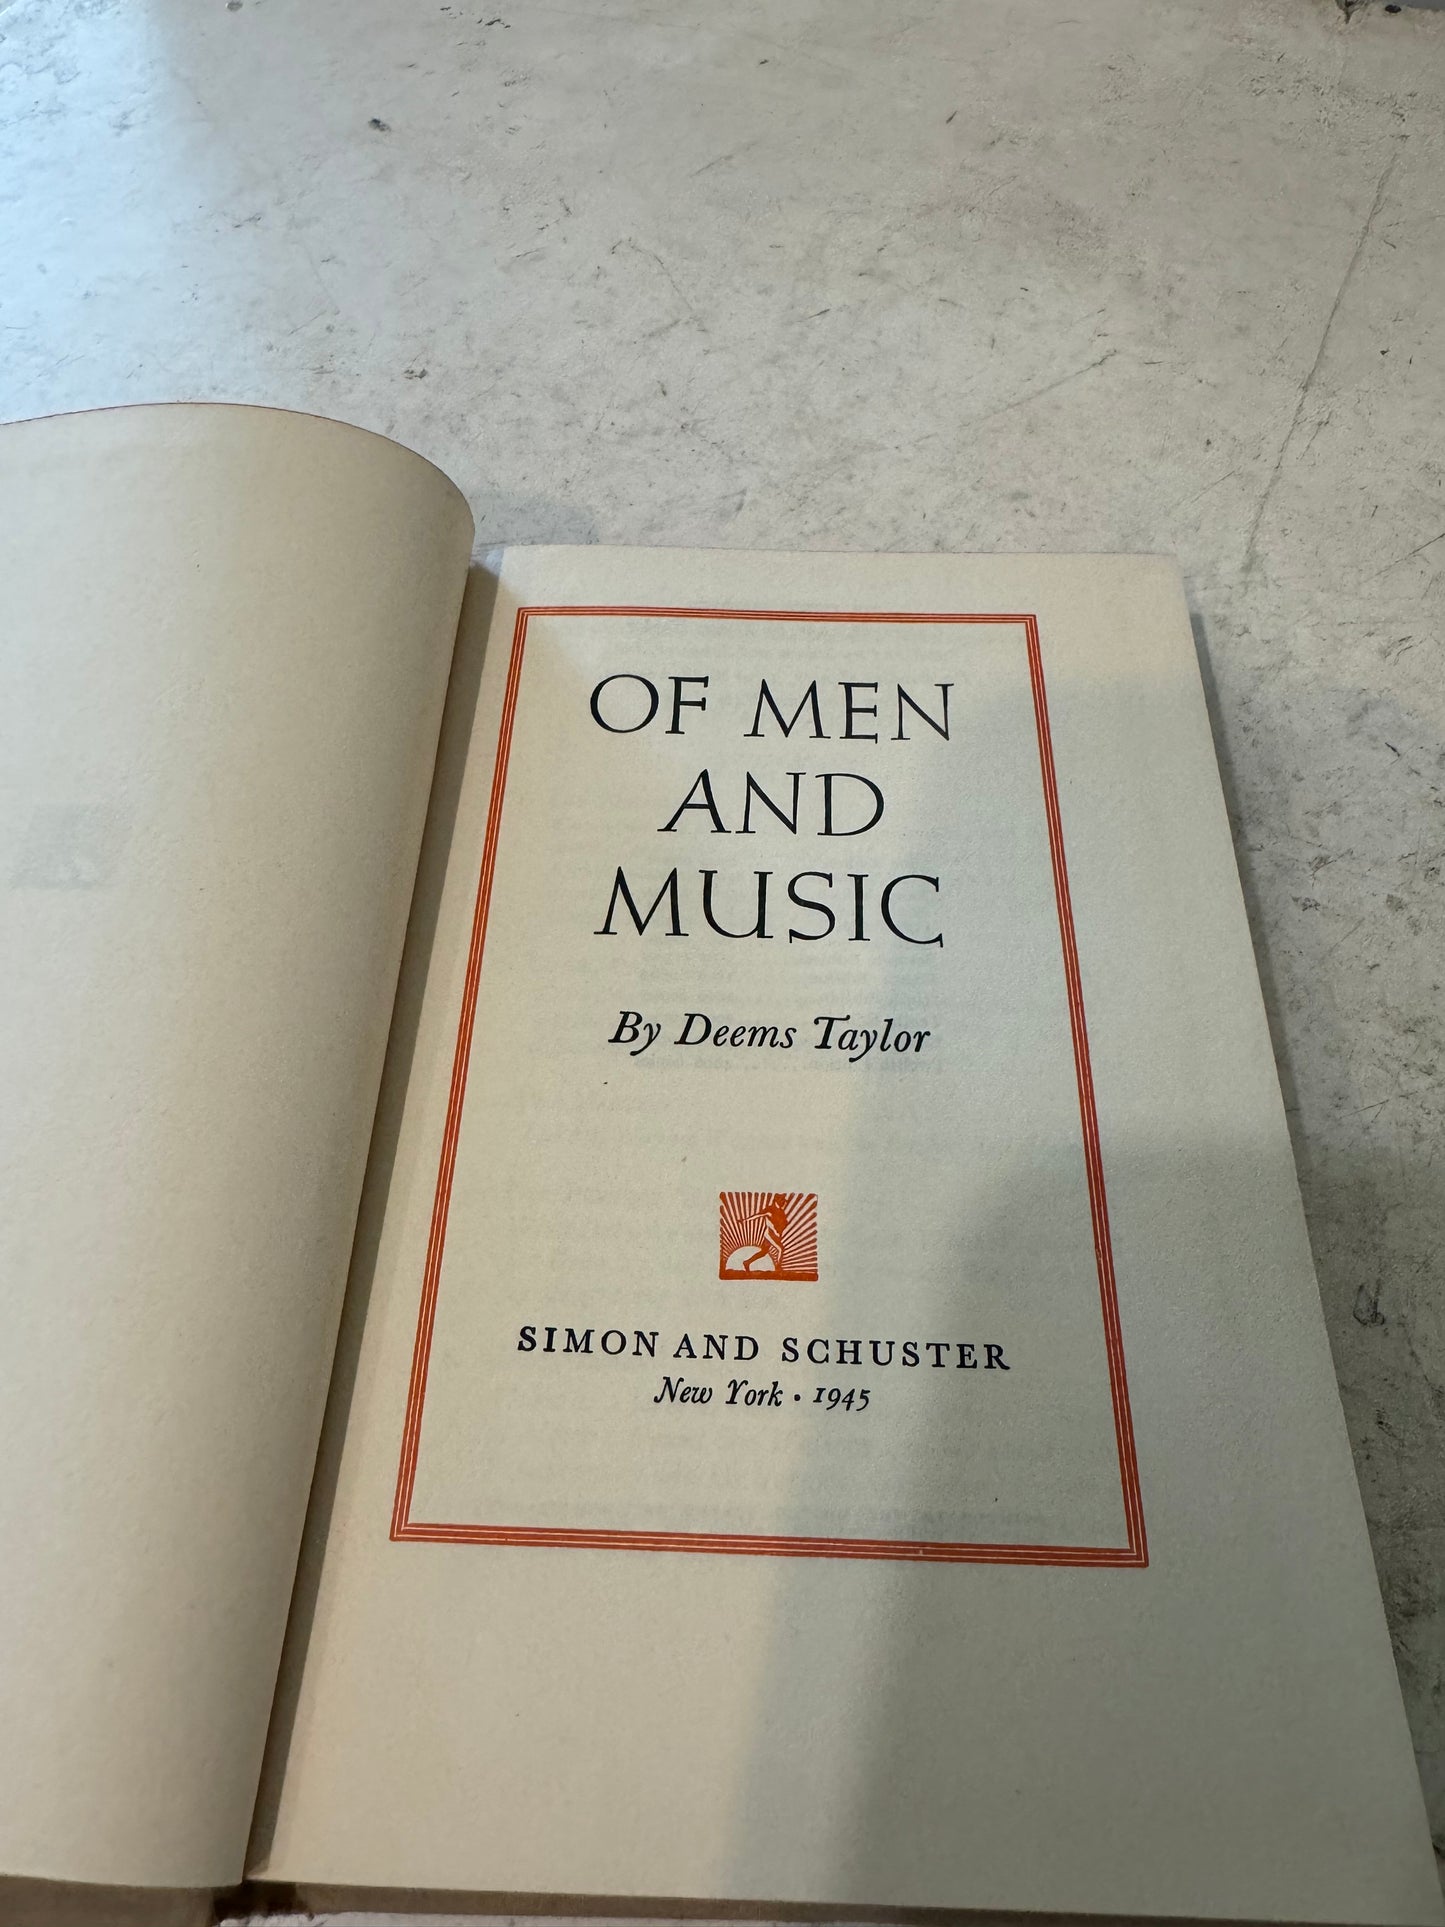 Of Men And Music